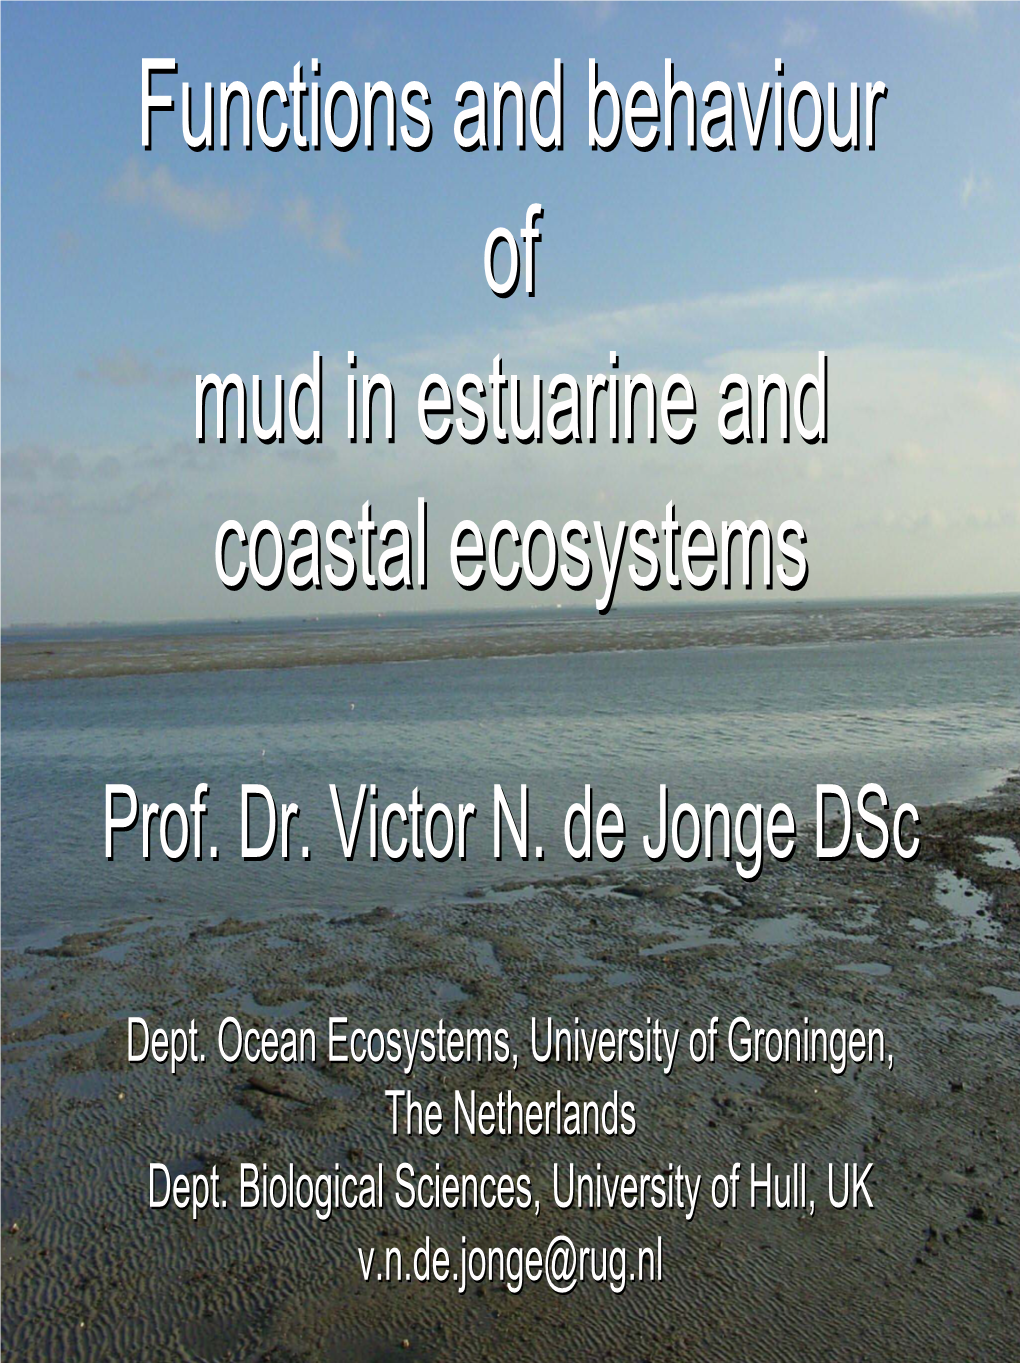 Functions of Mud in Estuarine and Coastal Ecosystems